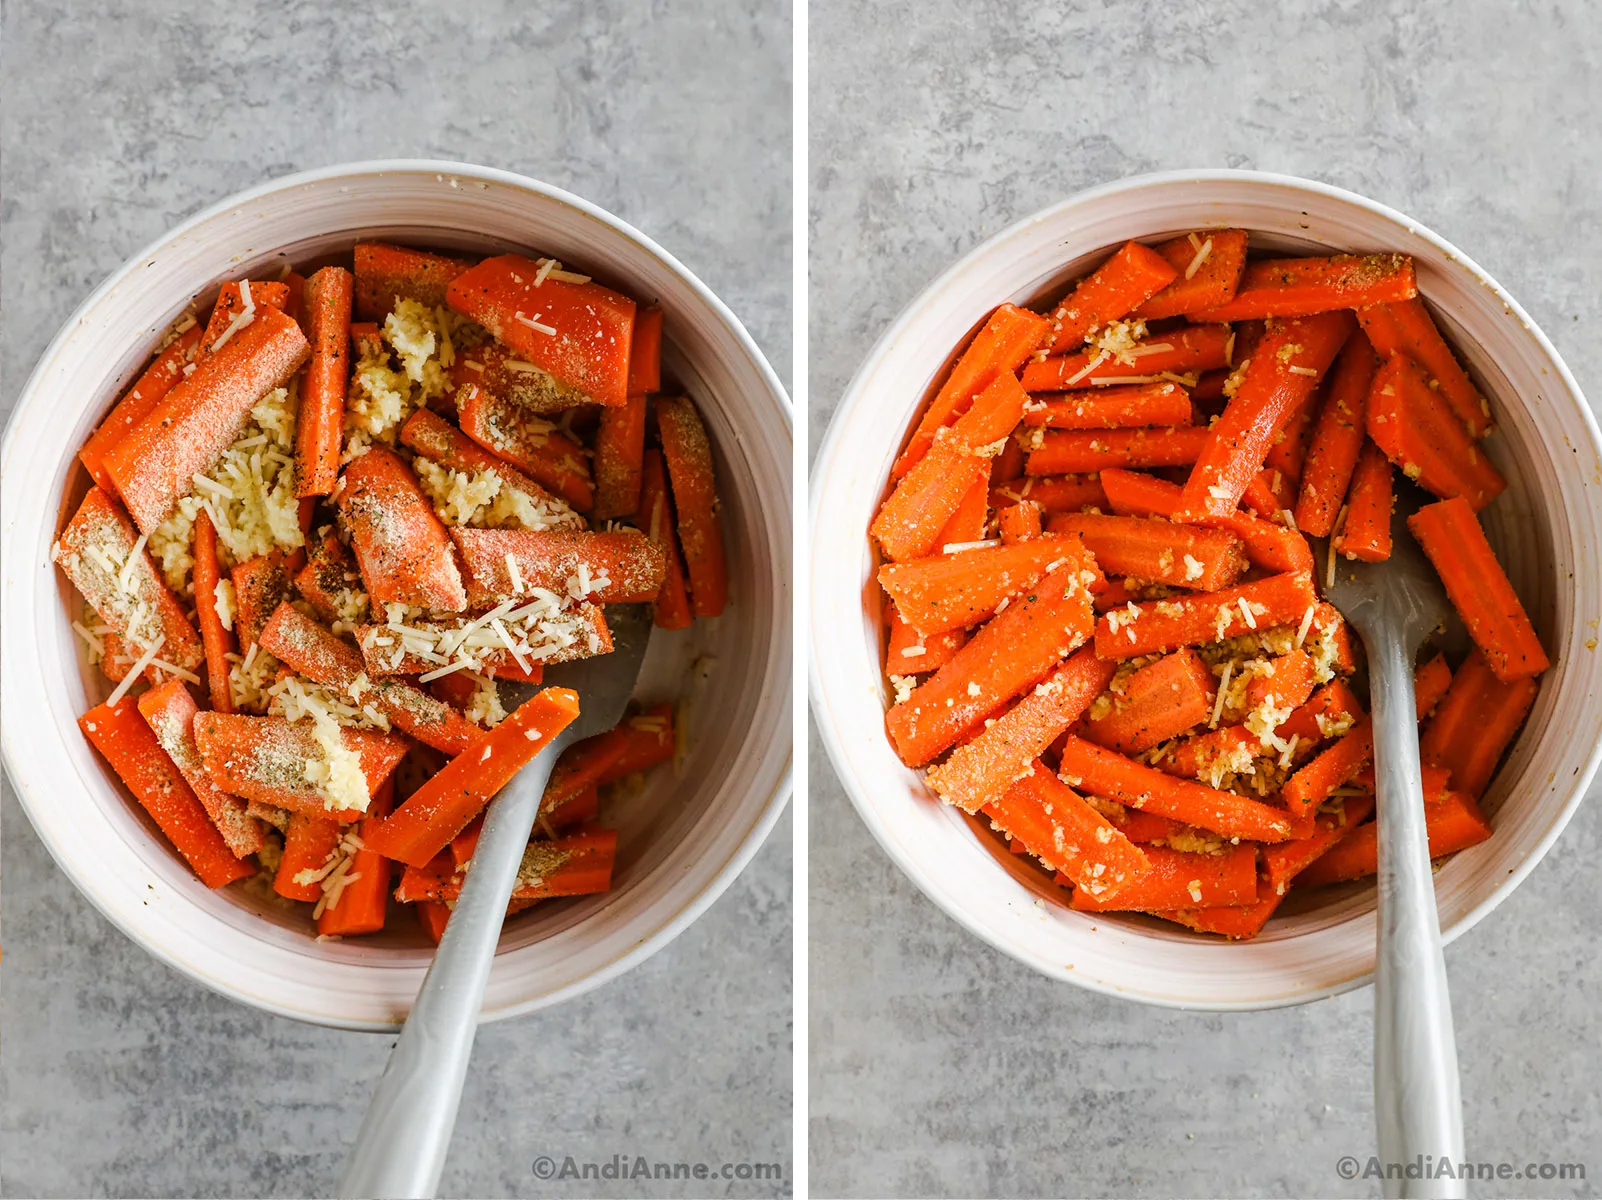 A bowl with parmesan and bread crumbs and chopped raw carrots.